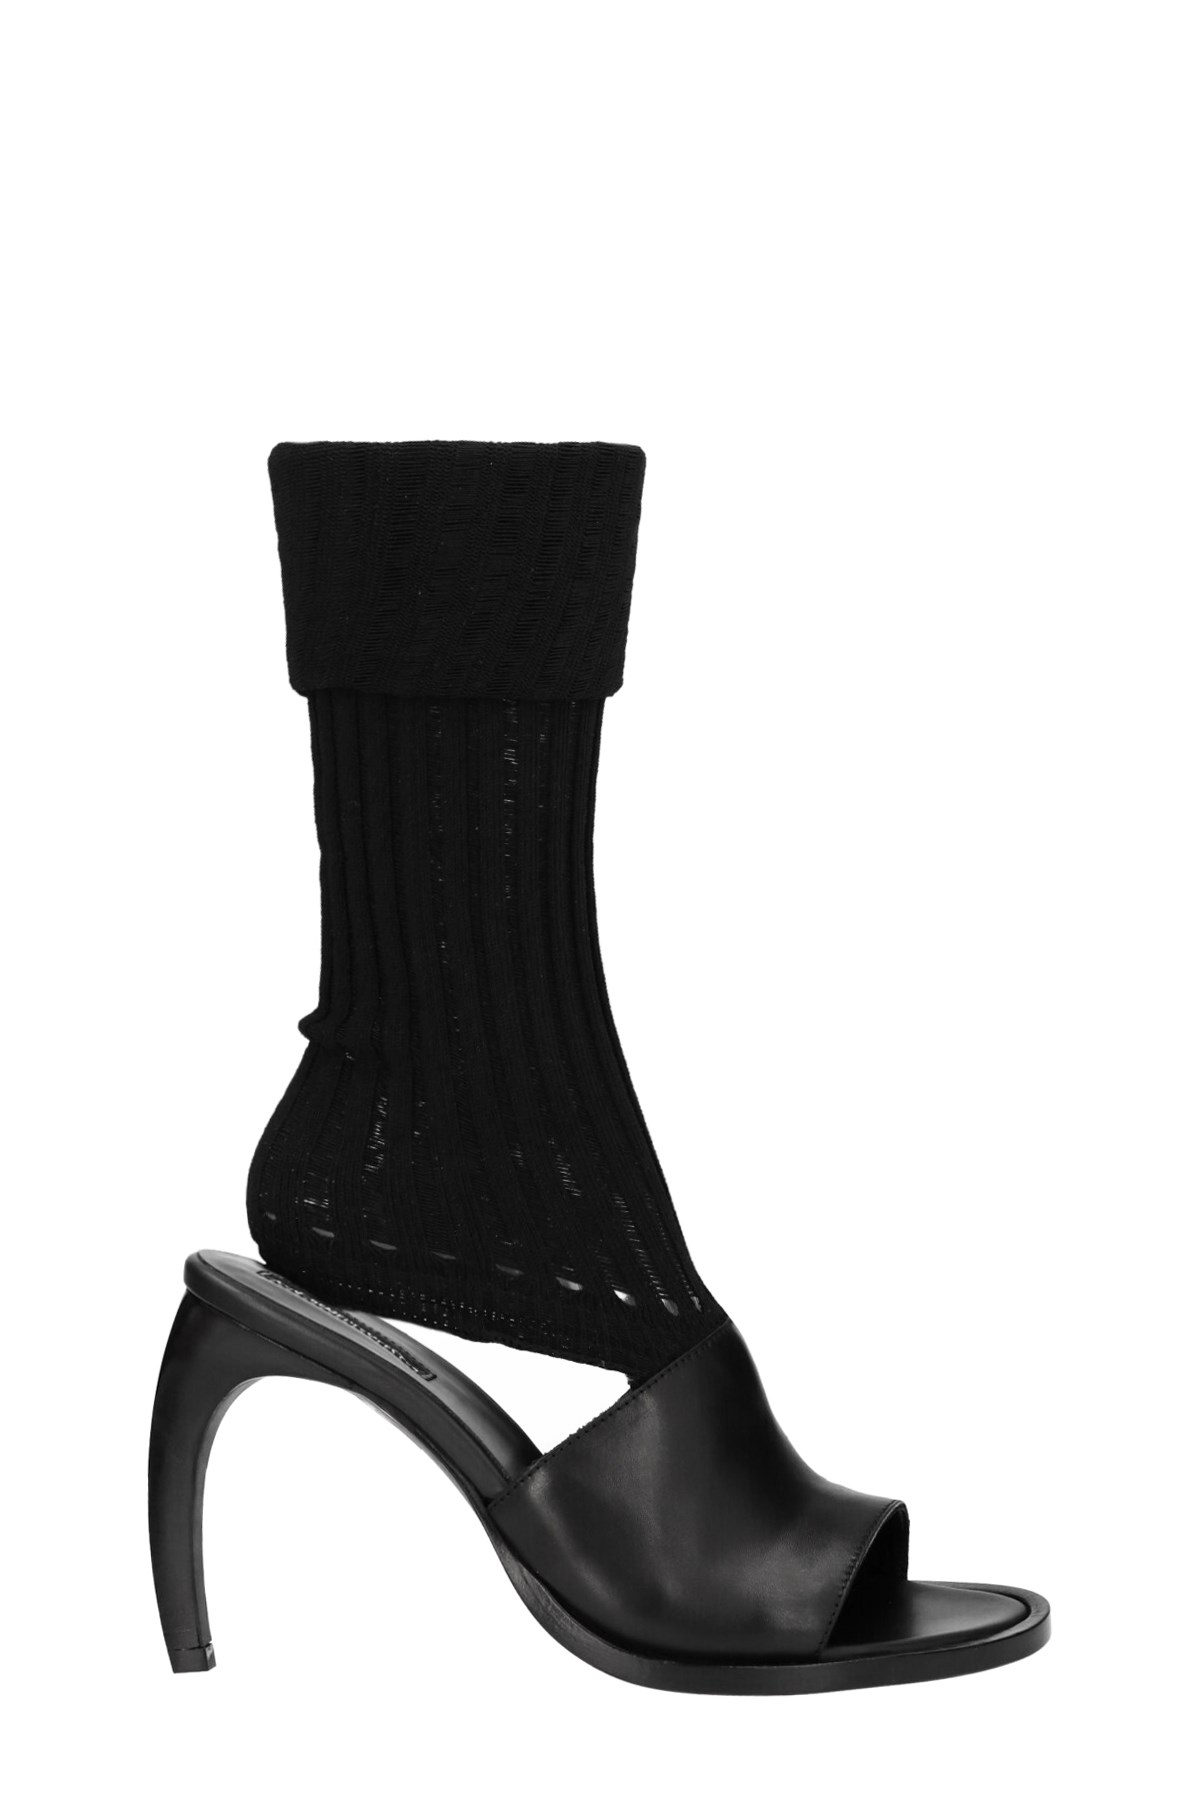 ANN DEMEULEMEESTER 'Curved-Heel' Mules